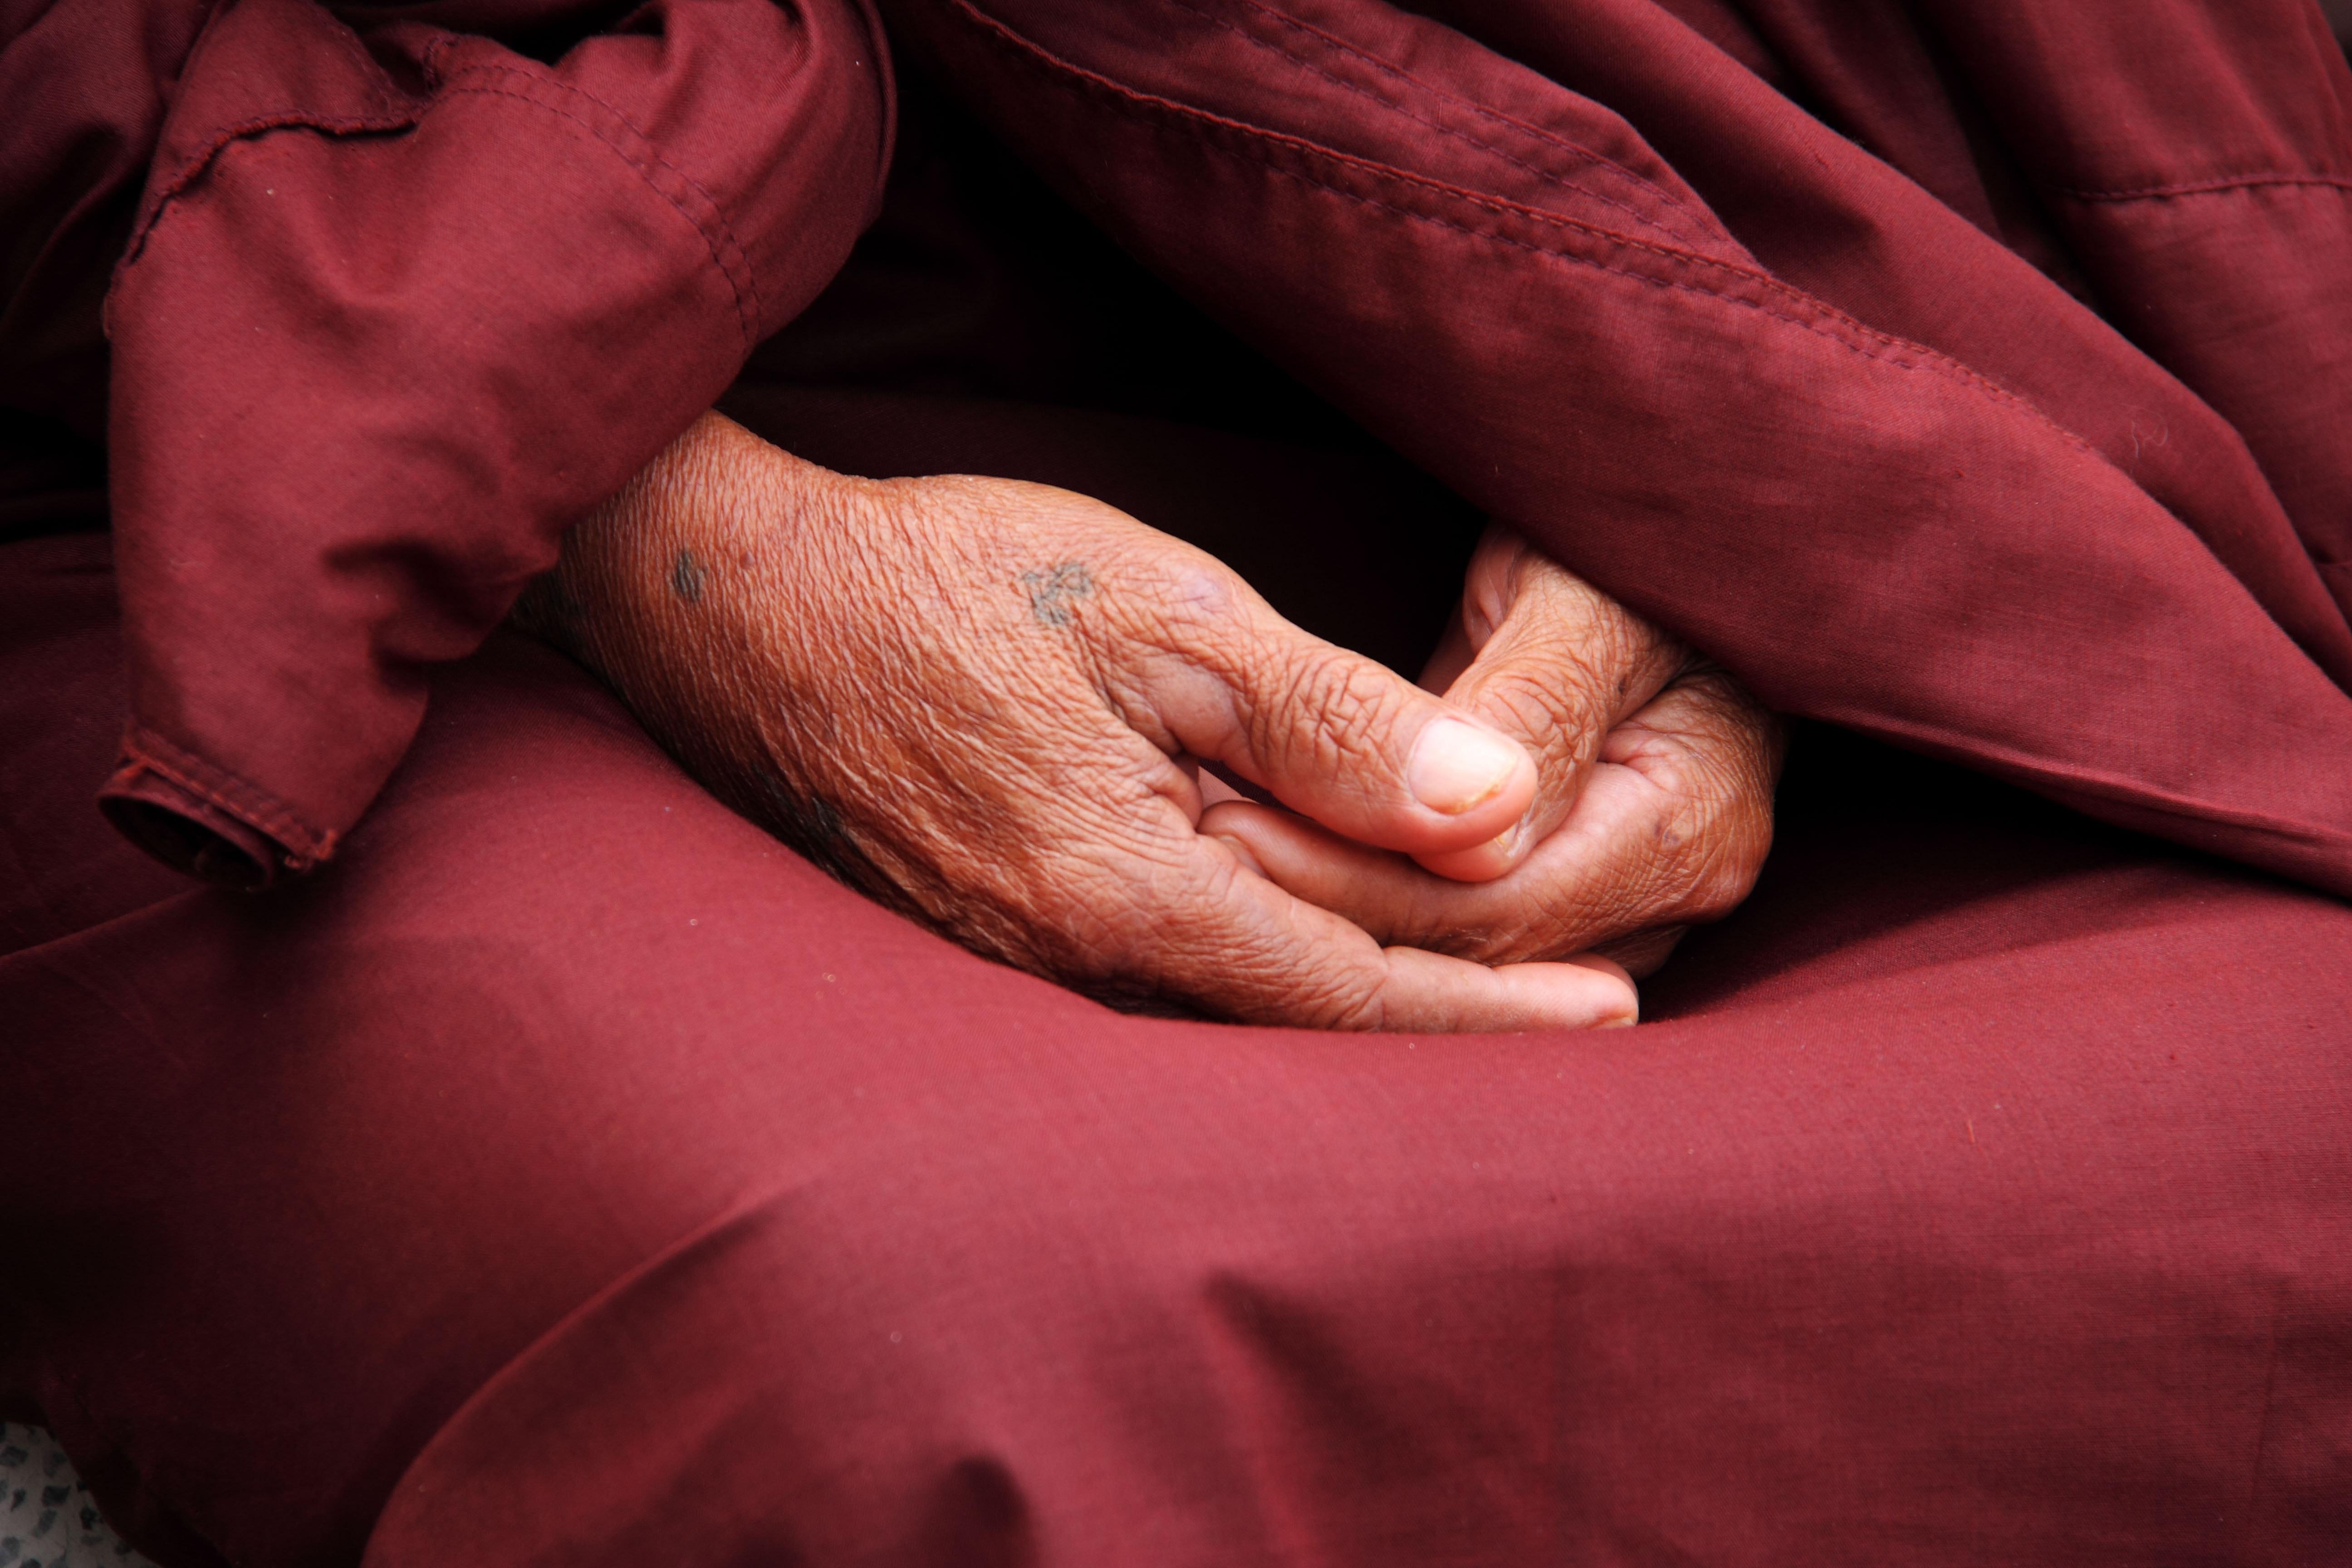 Monk folding their hands in their lap with a maroon robe